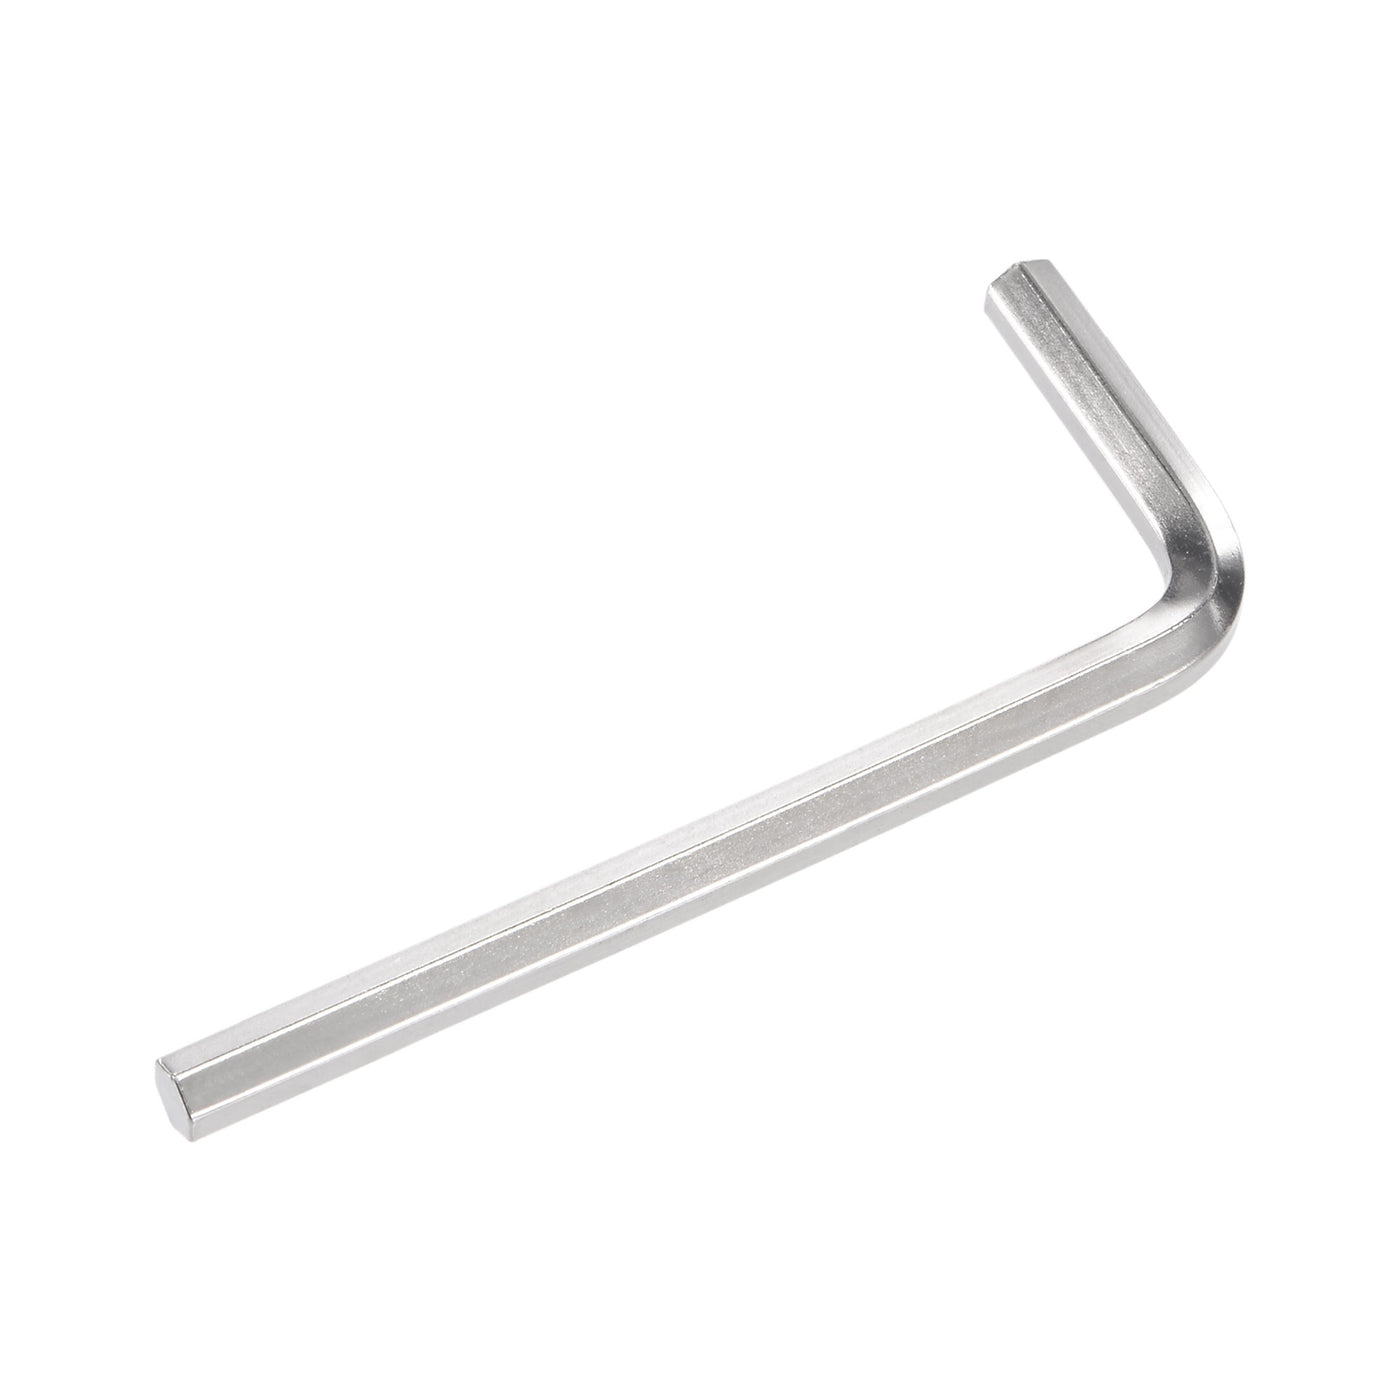 uxcell Uxcell Hex Key Wrench, L Shaped Long Arm CR-V Steel Repairing Tool